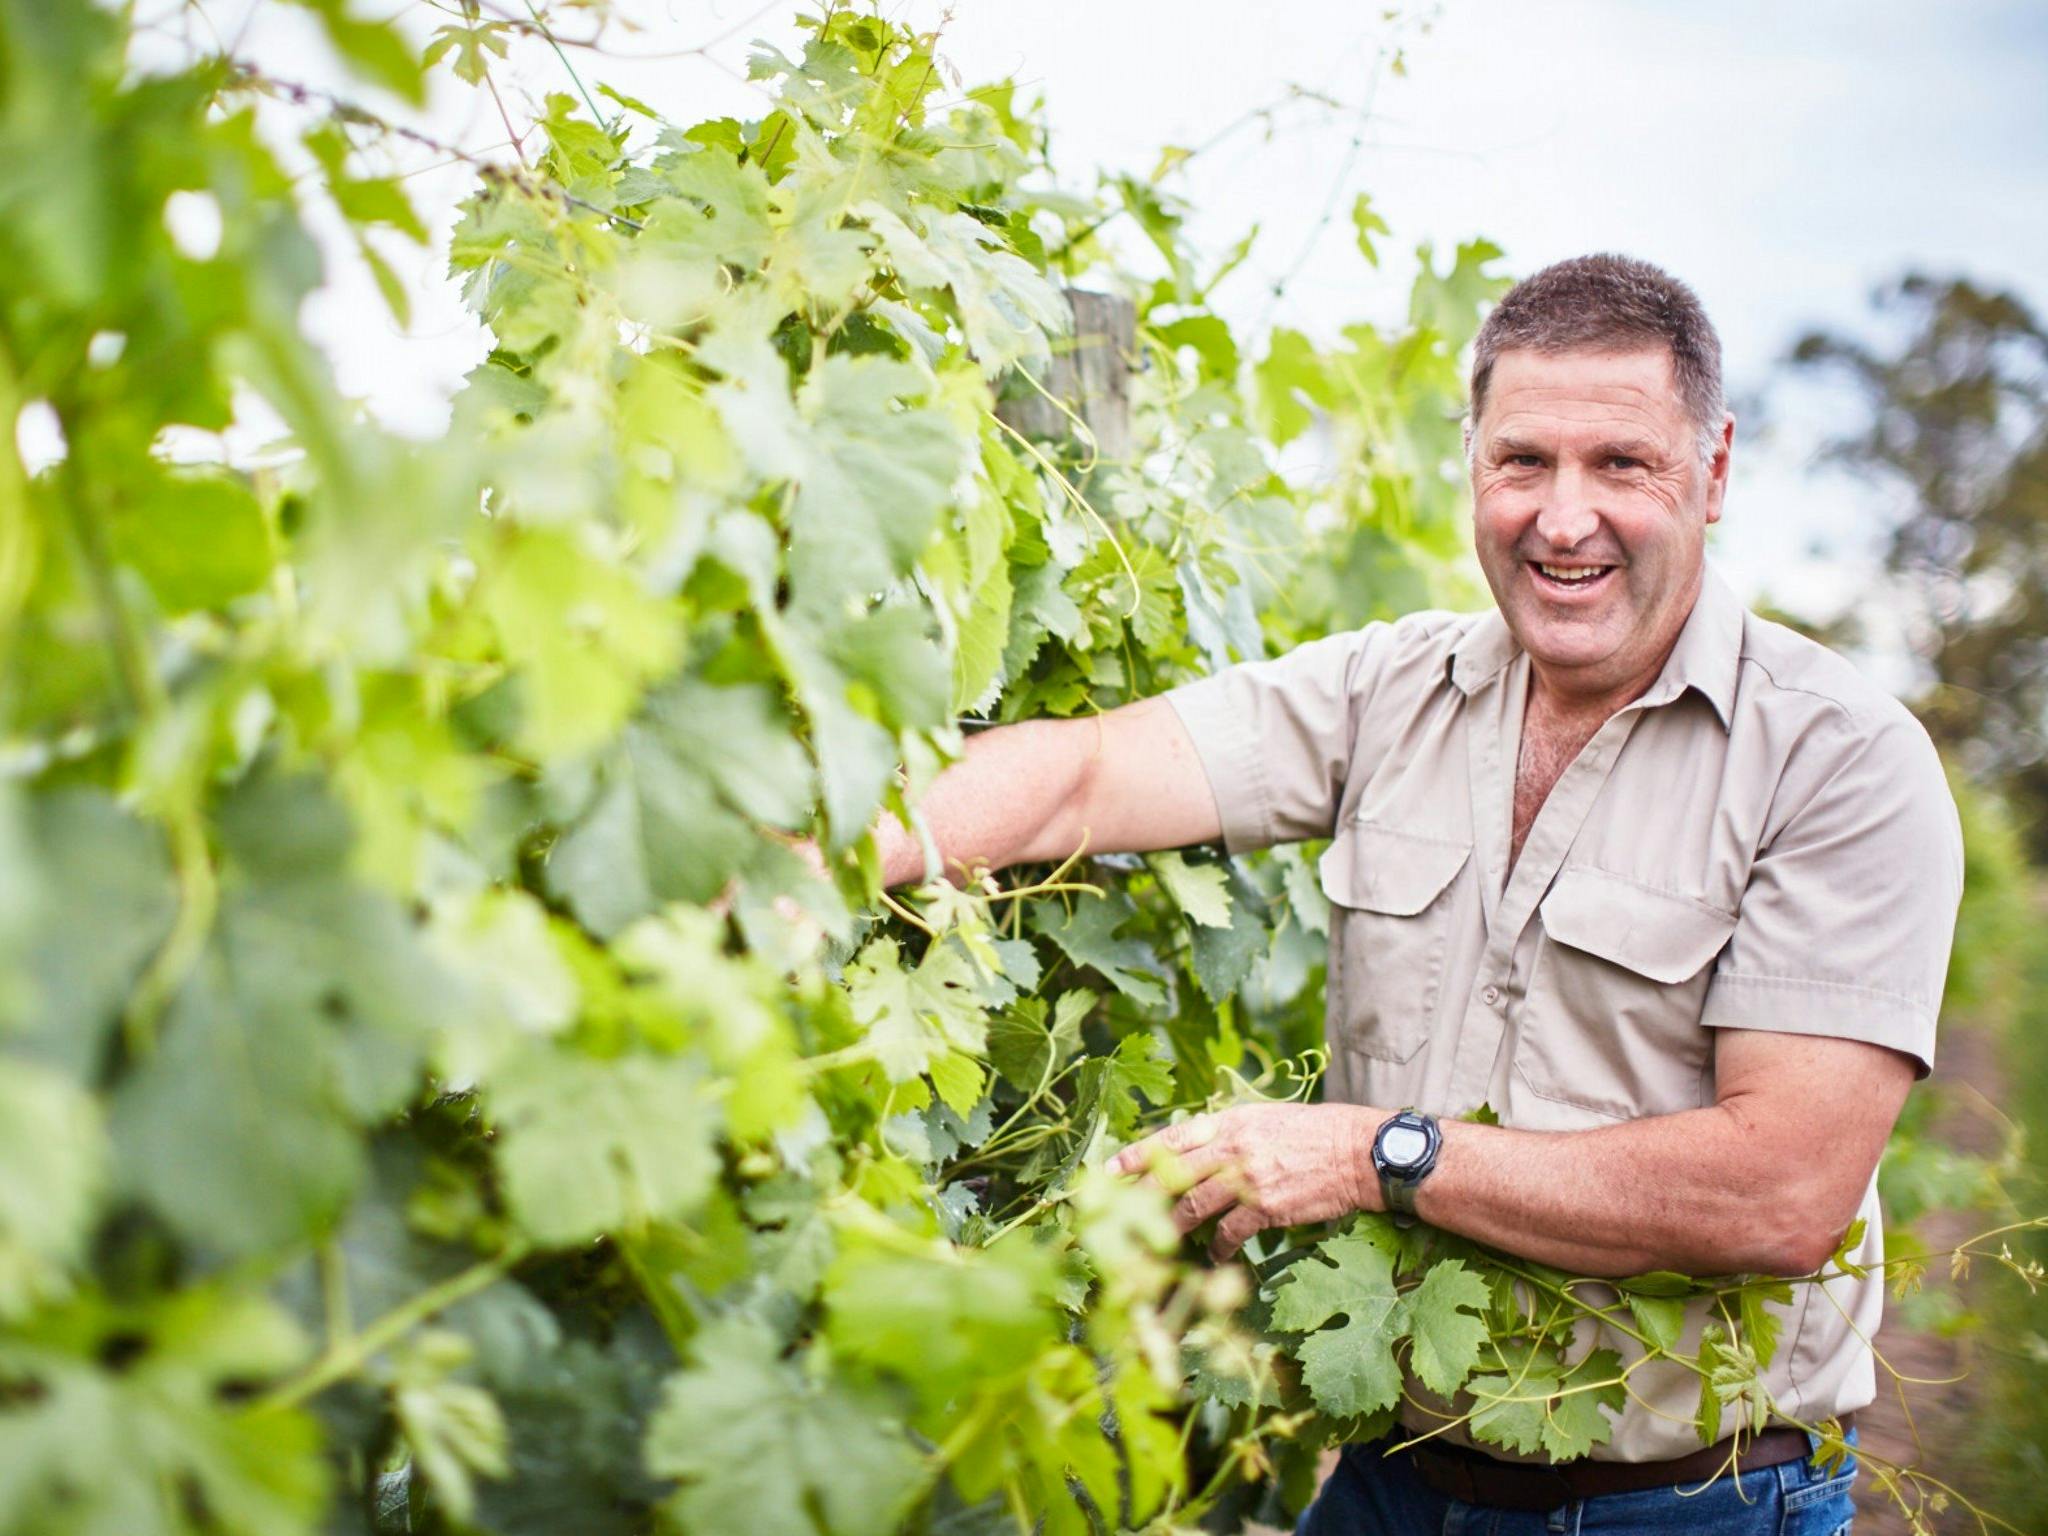 Winemaker, Andrew smiles as he inspects inside the vines canopy.